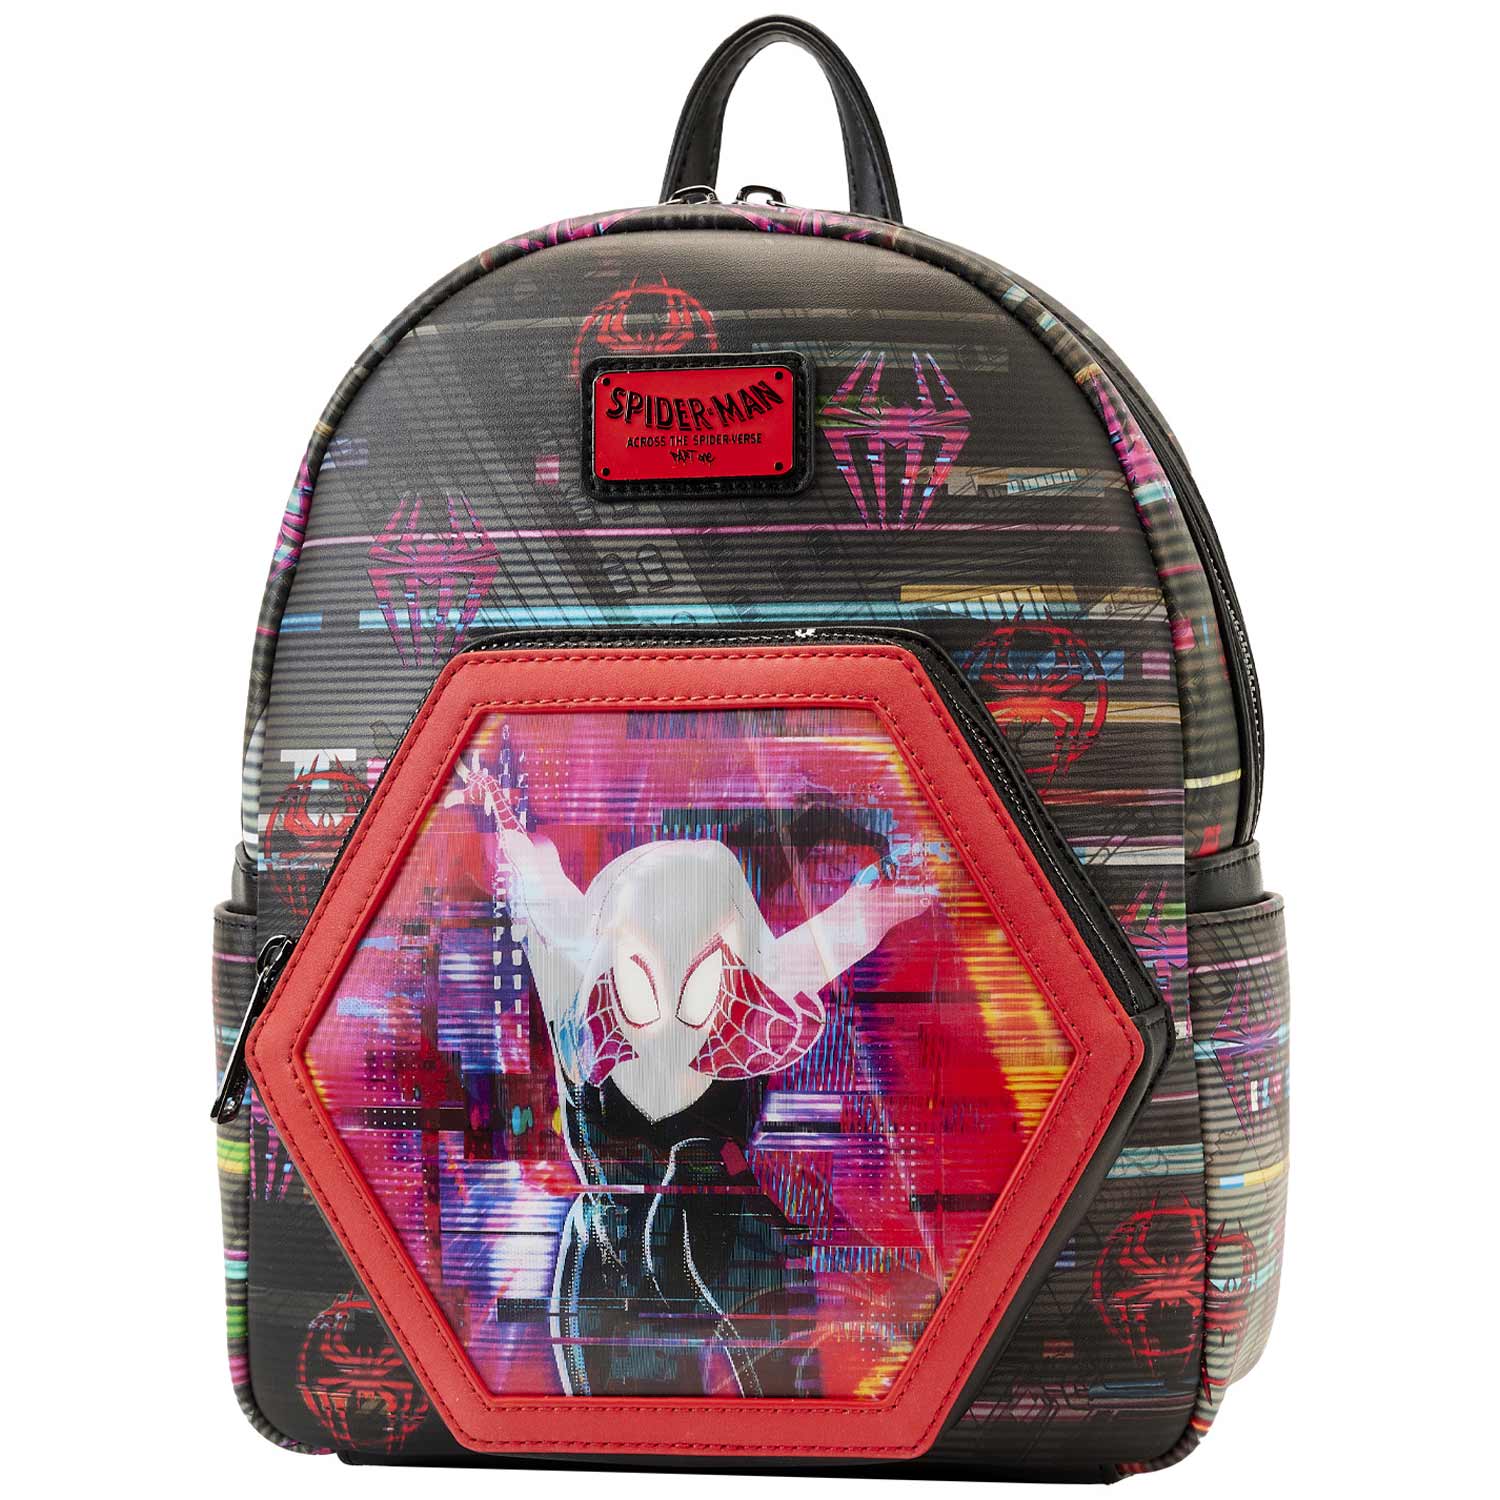 Loungefly x Marvel Across The Spiderverse Mini Backpack - GeekCore